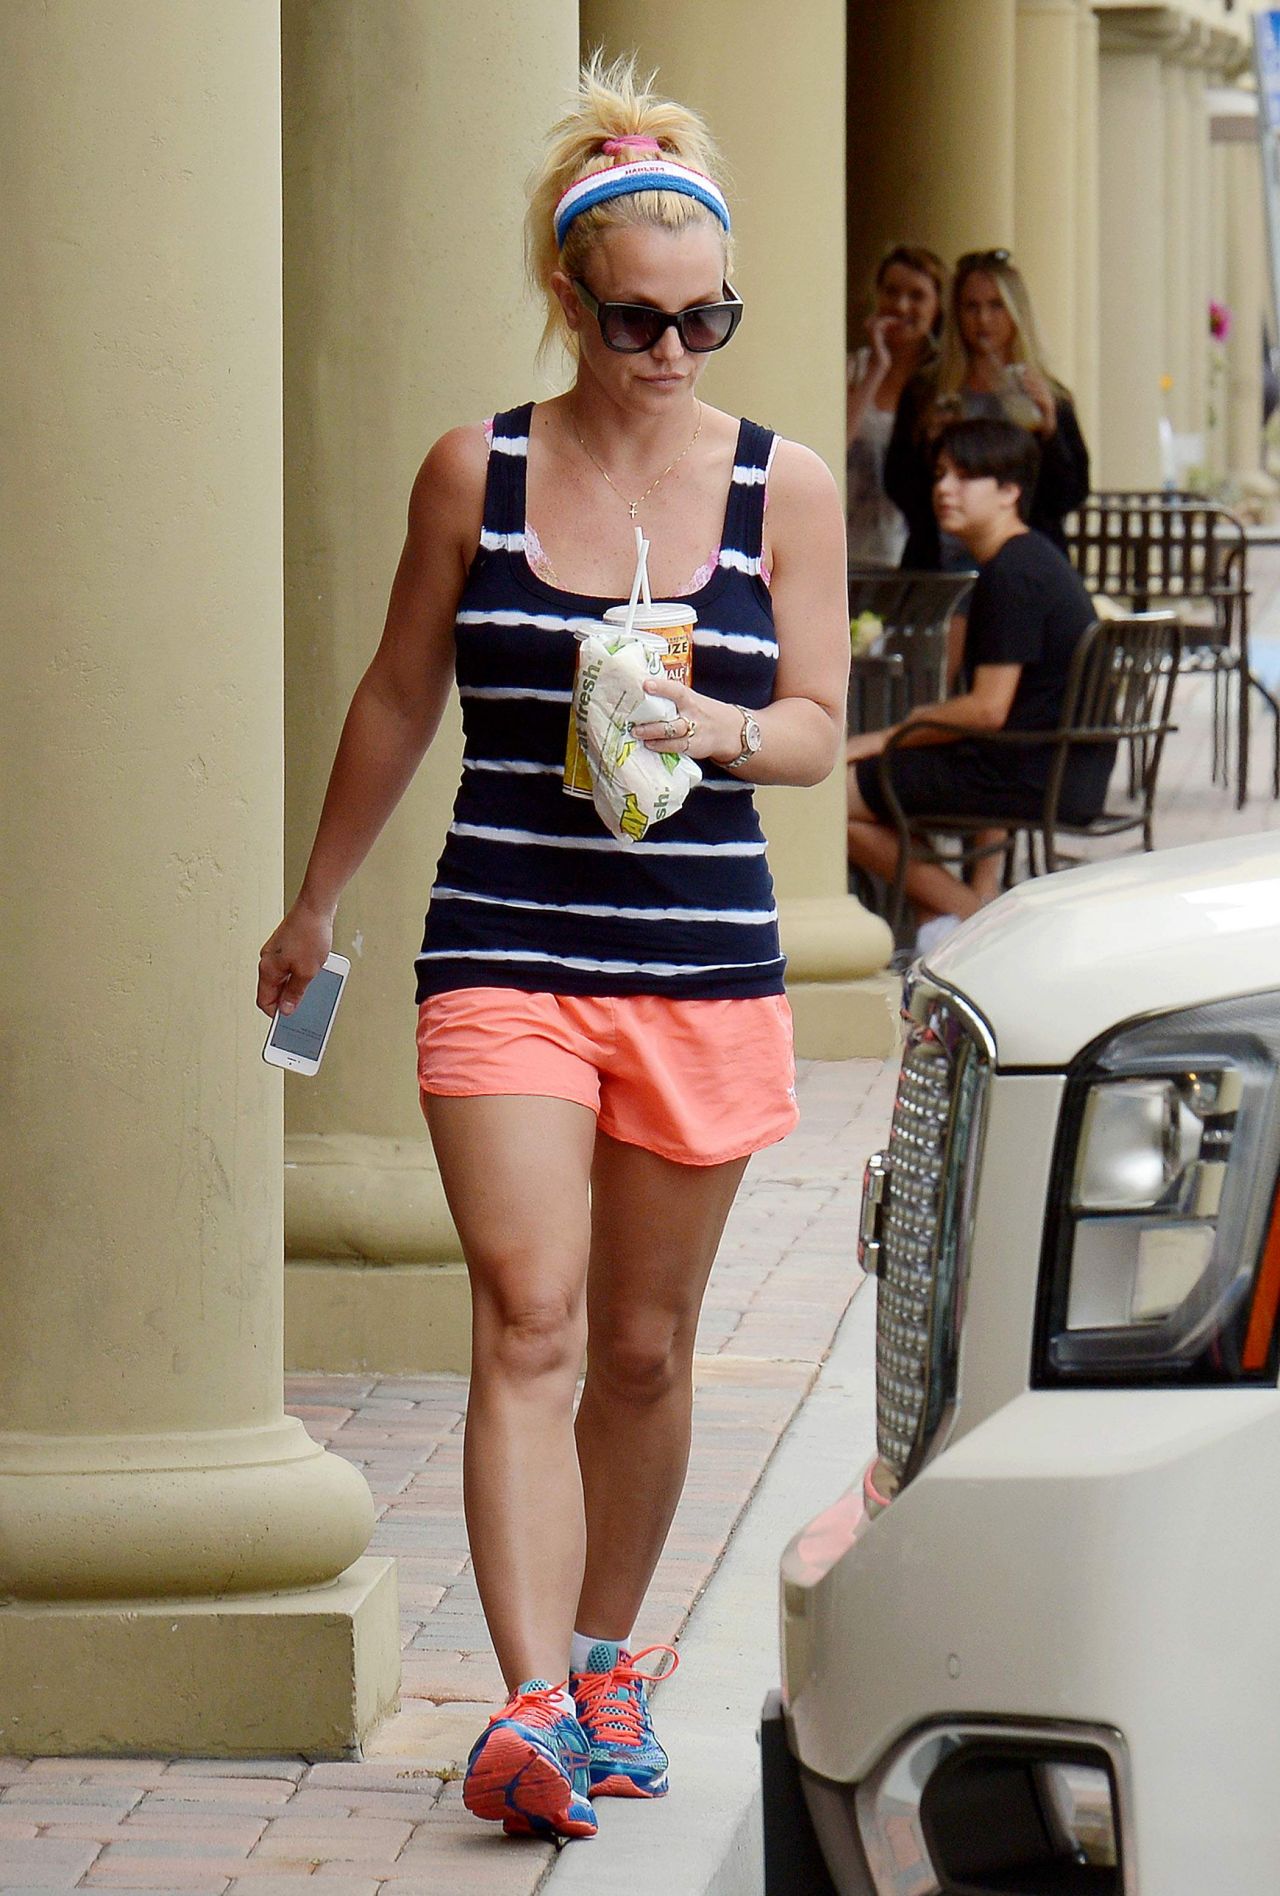 https://celebmafia.com/wp-content/uploads/2015/07/britney-spears-out-about-in-thousand-oaks-july-2015_5.jpg